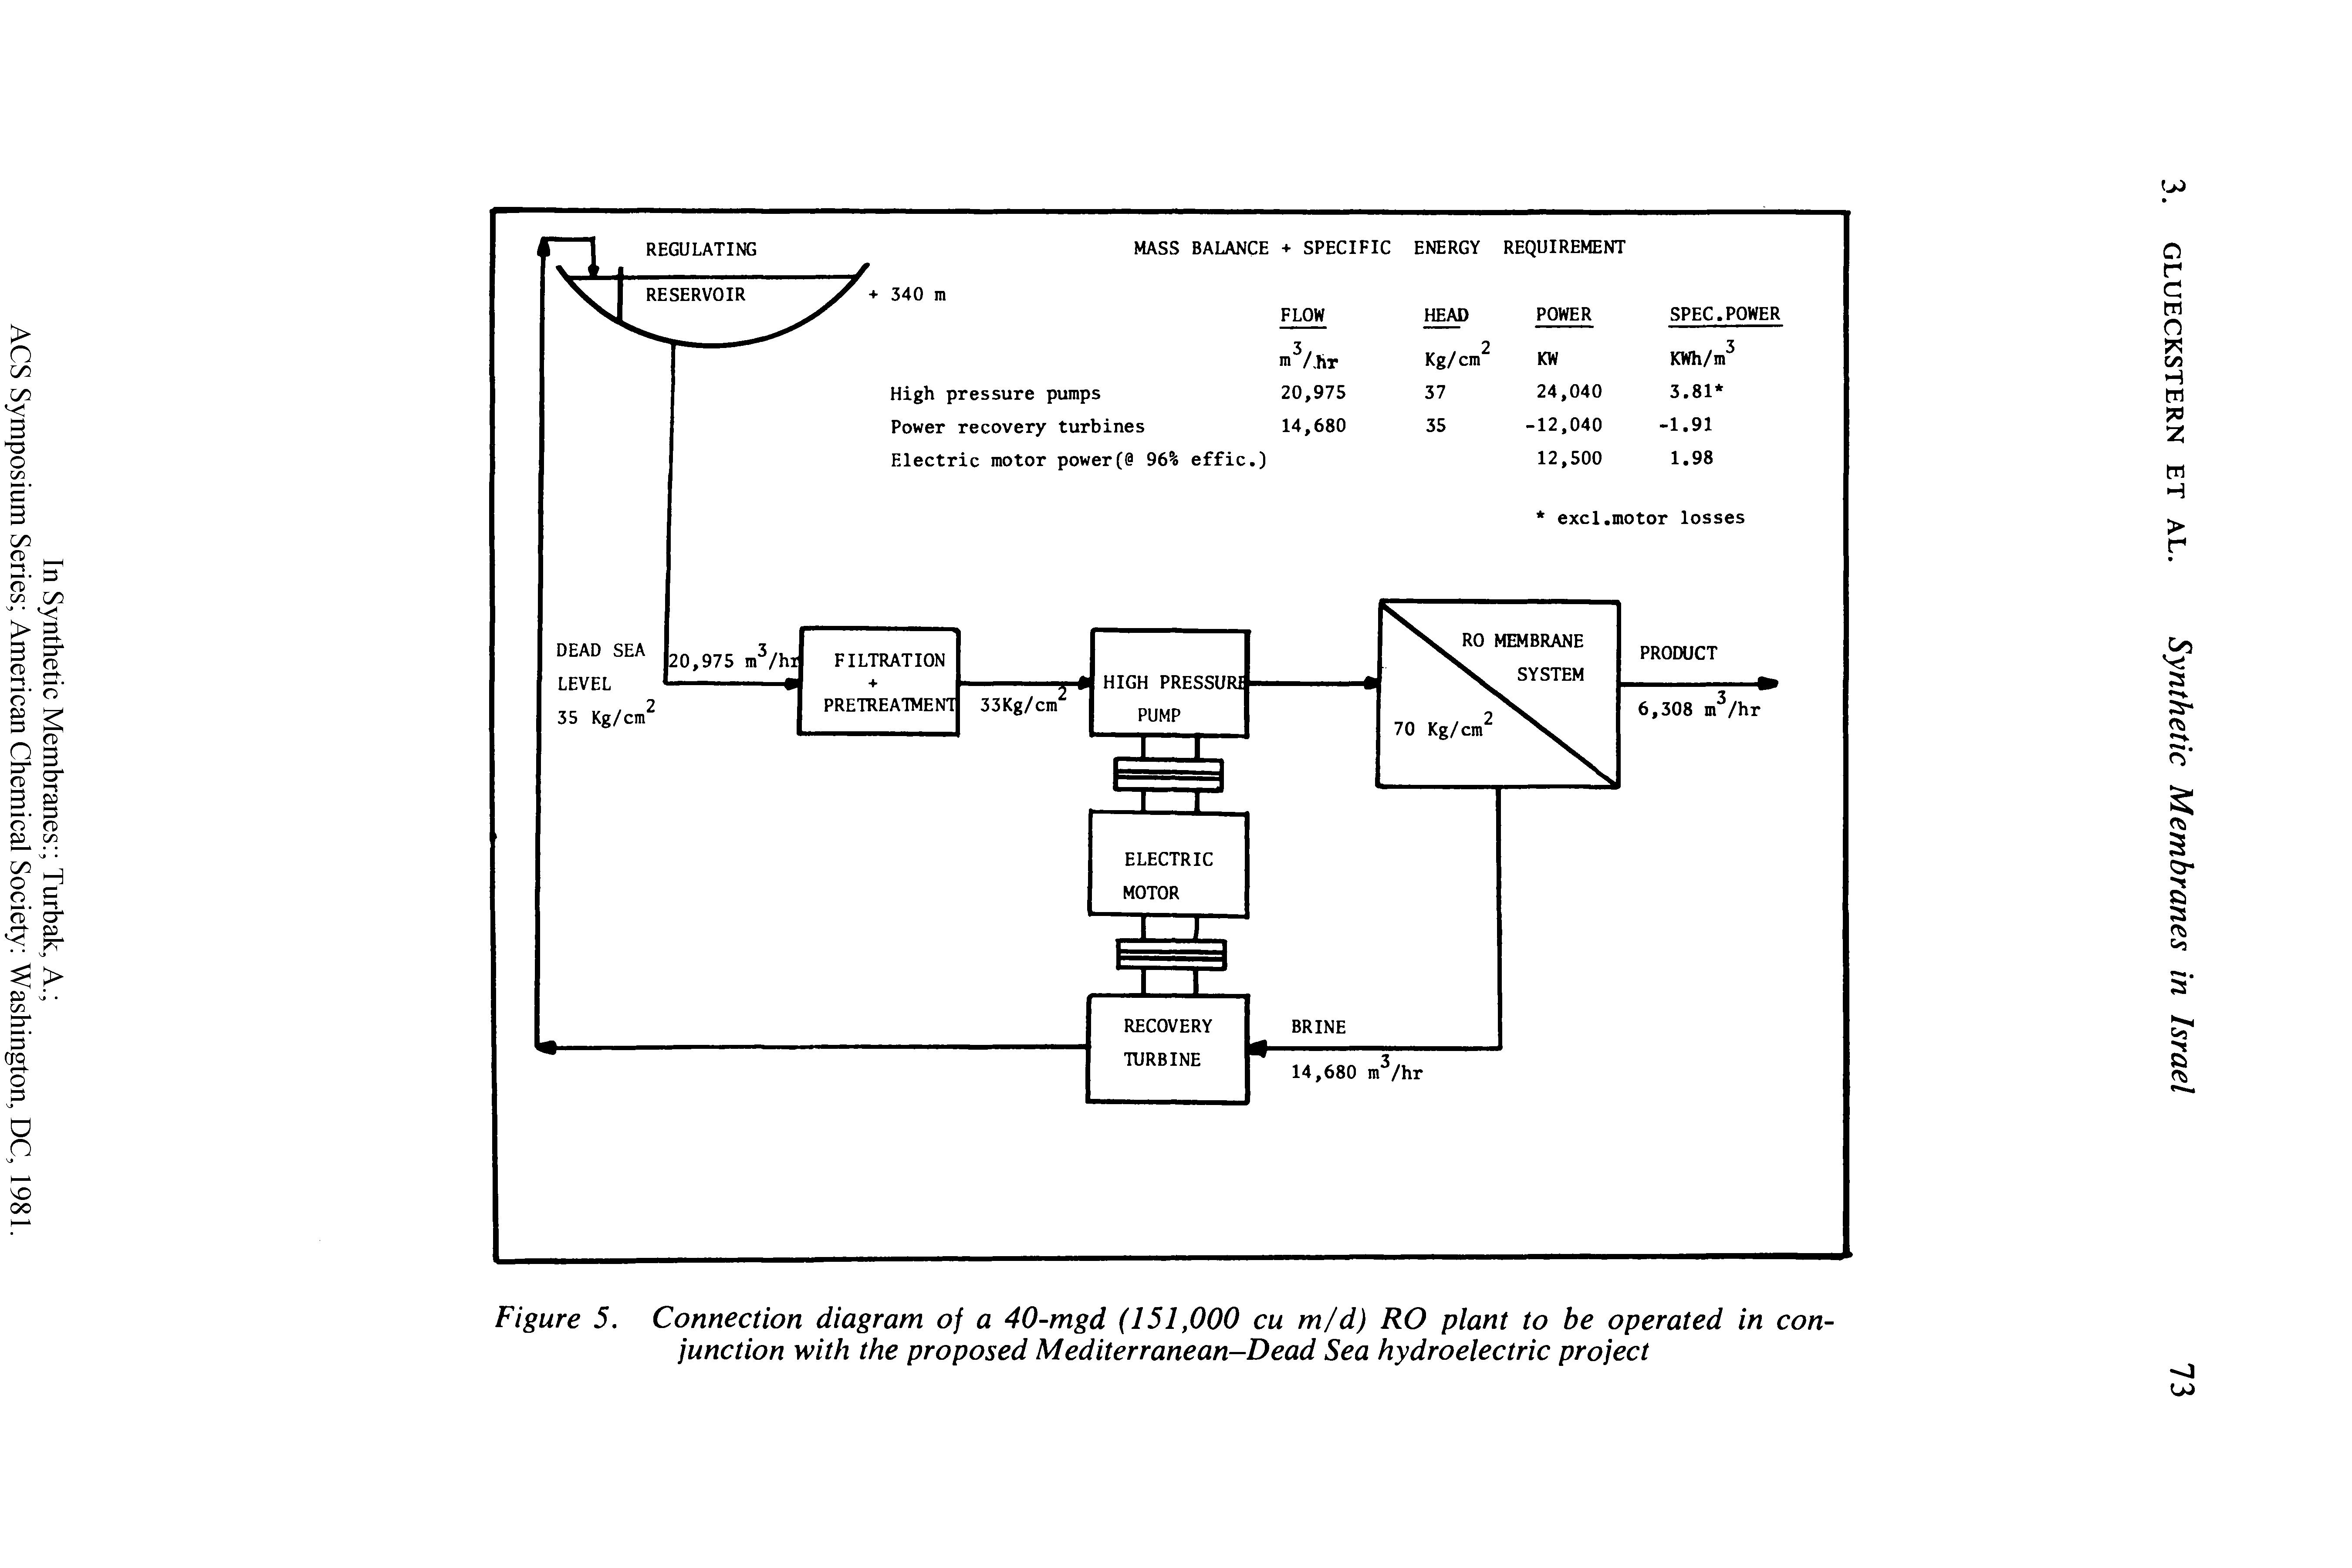 Figure 5. Connection diagram of a 40-mgd (151,000 cu m/d) RO plant to be operated in conjunction with the proposed Mediterranean-Dead Sea hydroelectric project...